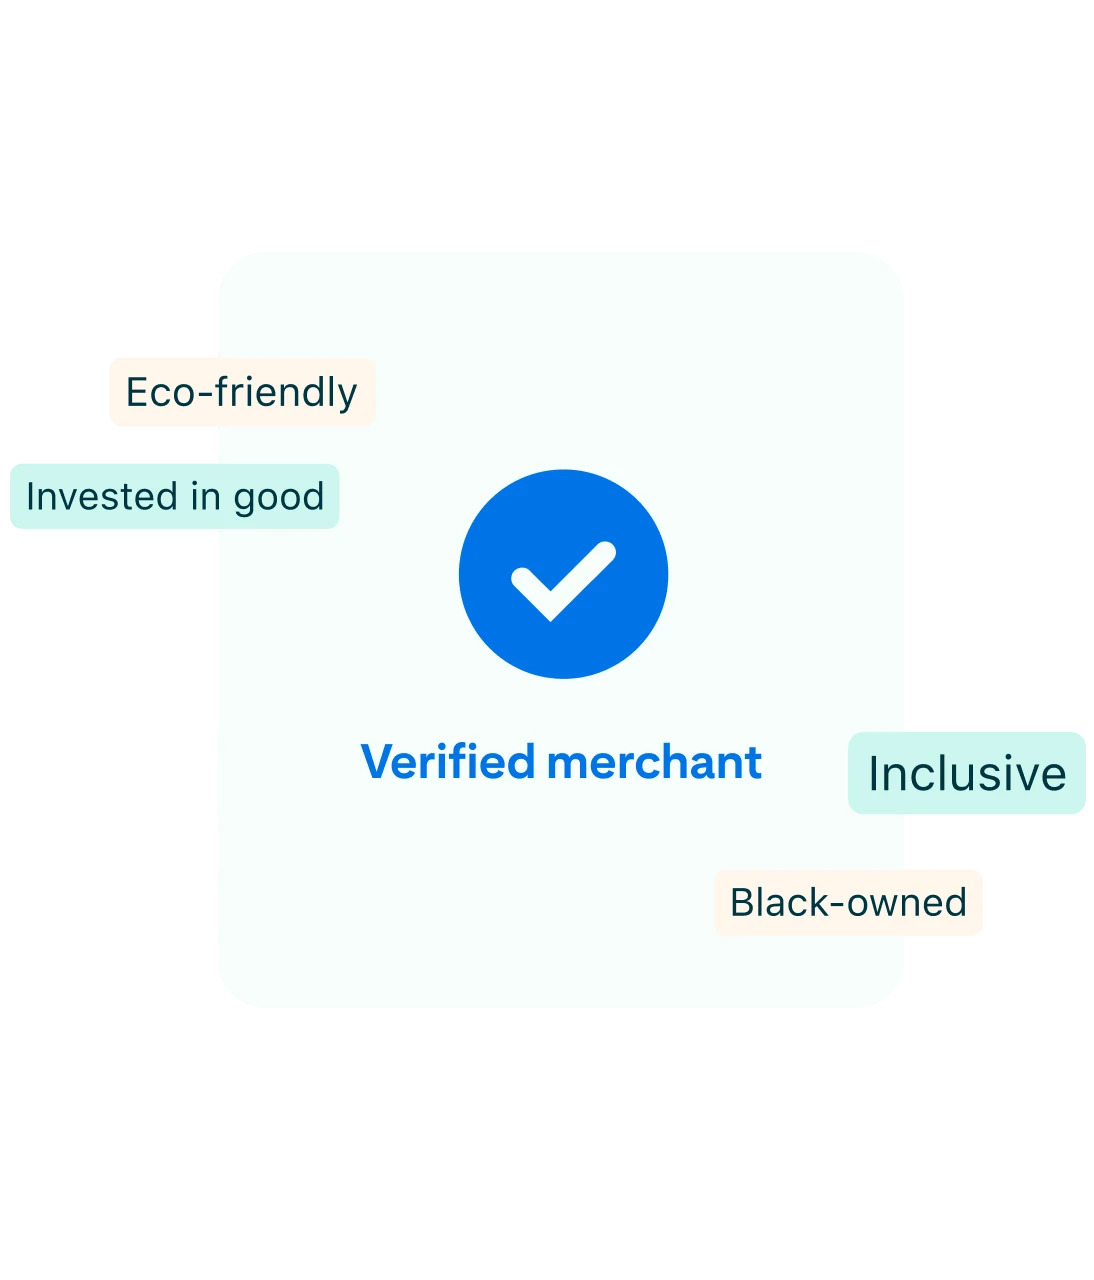 Image of Pinterest's verified merchant logo, surrounded by phrases on the left and right of the logo. To the left, from top to bottom, read the phrases "Eco-friendly" and "Invested in good." To the right, from top to bottom, read the phrases "Inclusive" and "Black-owned."